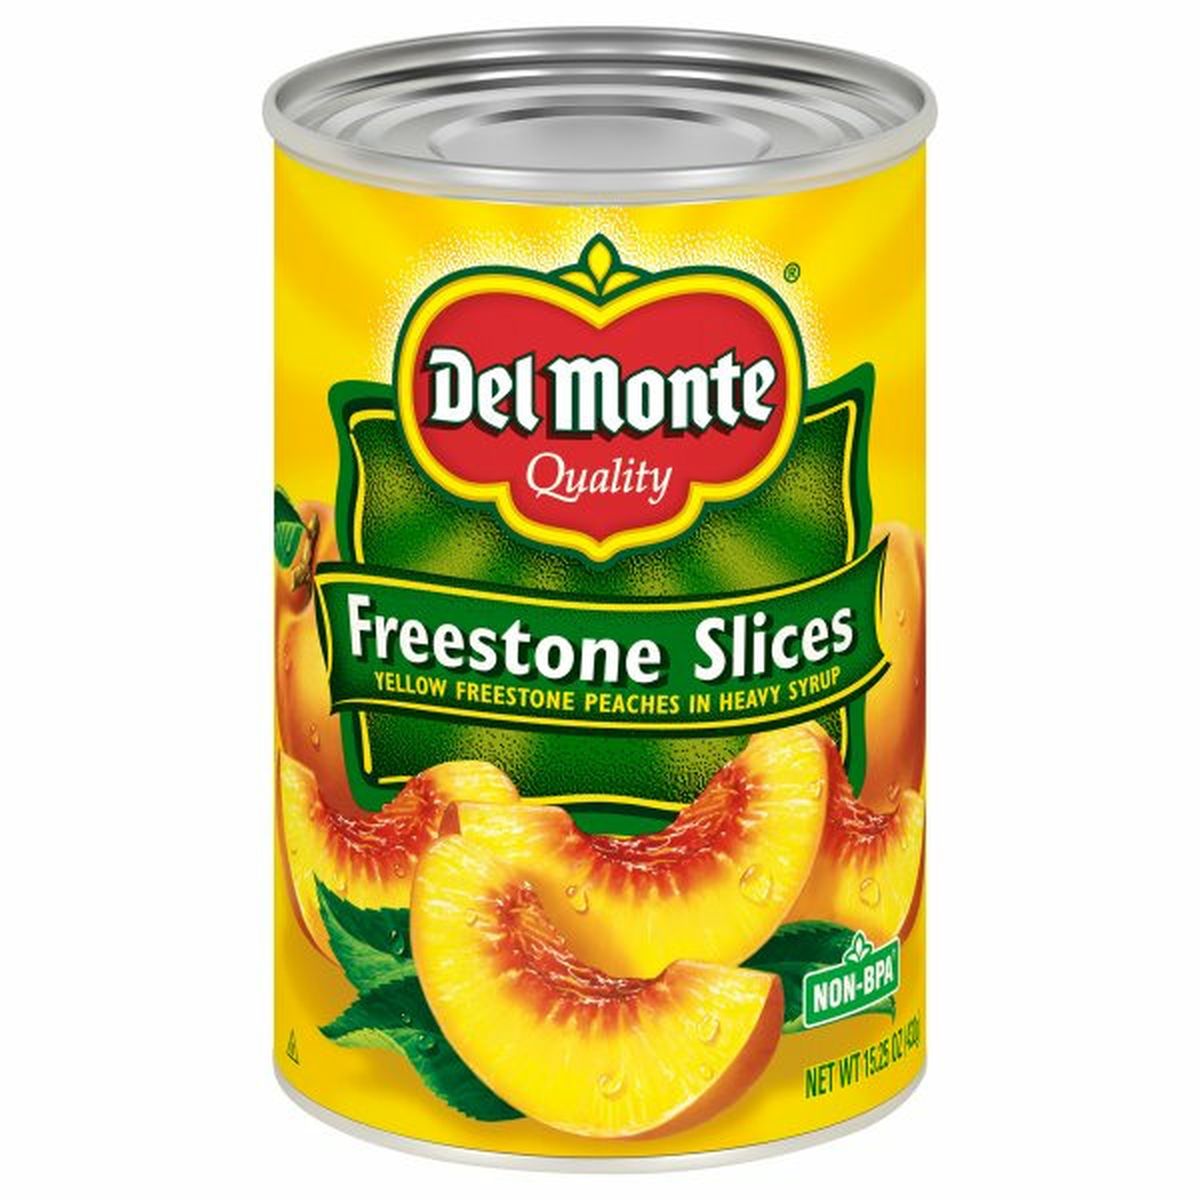 Calories in Del Monte Peaches, Freestone Slices, Yellow In Heavy Syrup